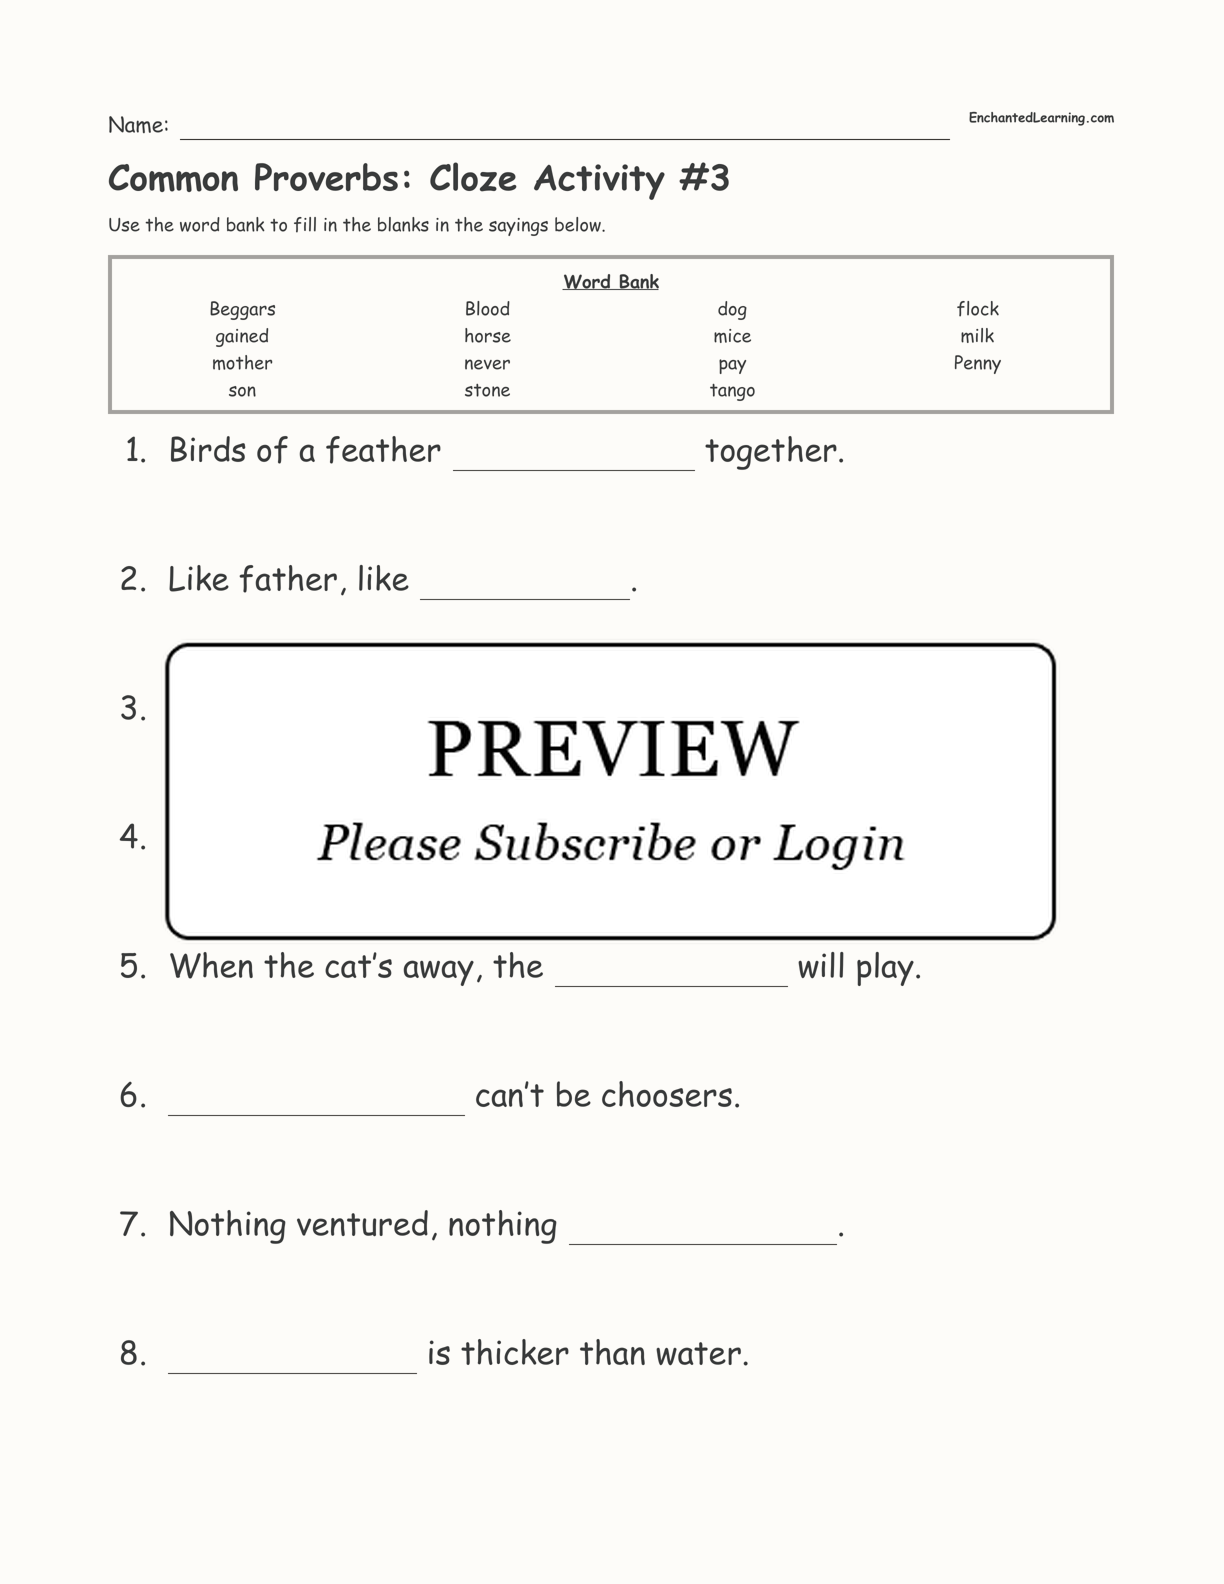 Common Proverbs: Cloze Activity #3 interactive worksheet page 1